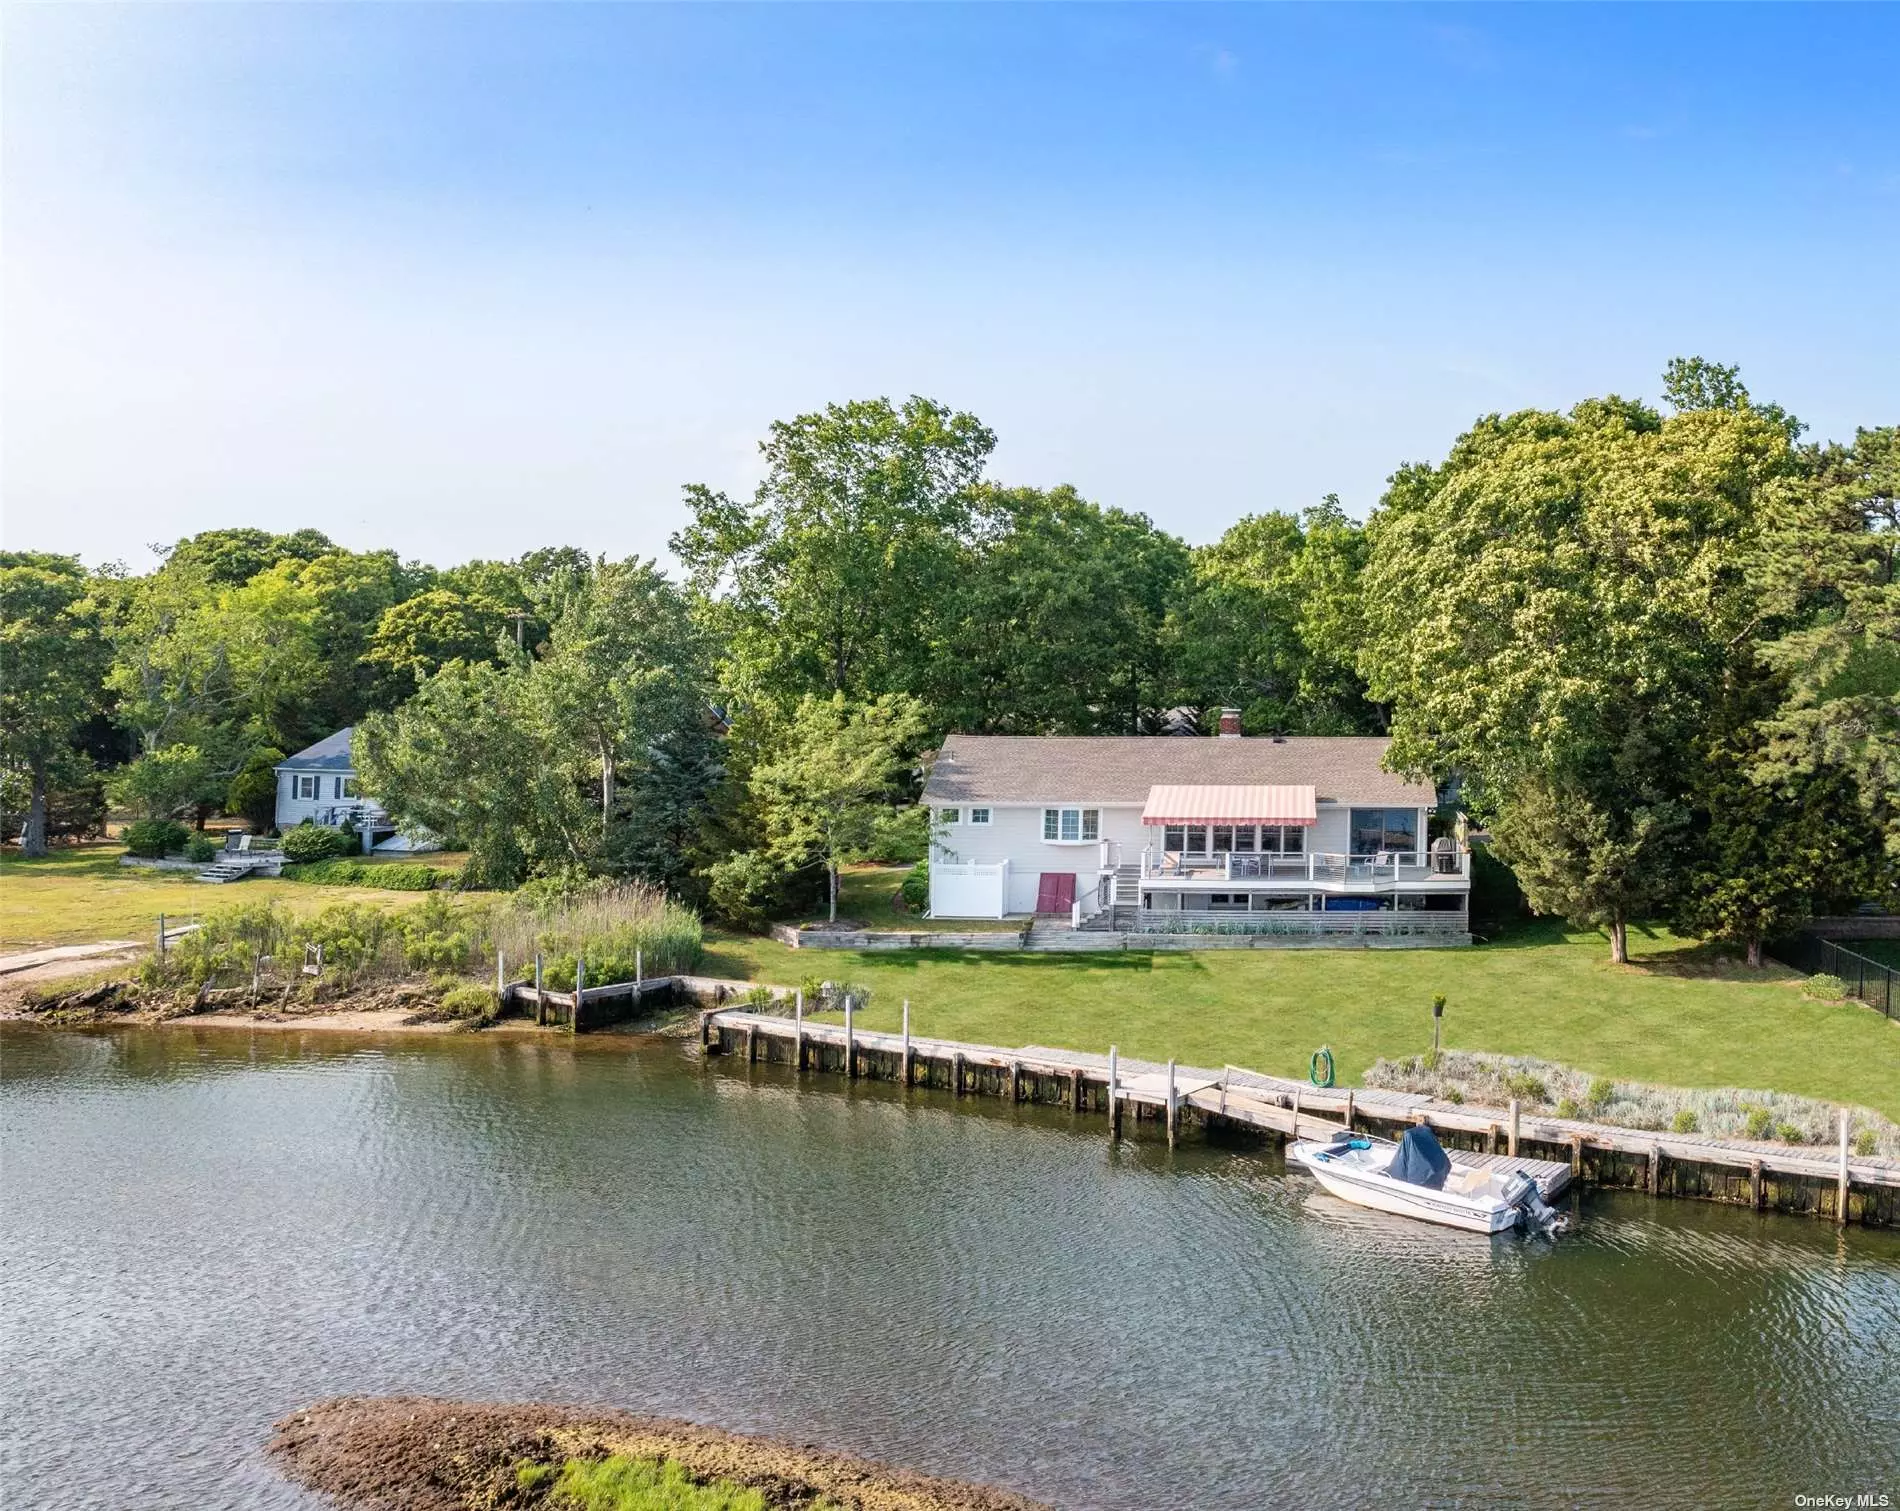 Waterfront ranch on James Creek with dock and large waterfront deck with shade- awning. Outdoor shower. Living room with fireplace and waterviews. Dining room with waterviews. Cozy den with TV. Master bedroom ensuite with waterviews - 3 Bedroom, 2 Bath in all. Walk to deeded bay beach. Close to Mattituck shopping, dining, Hampton Jitney and LI railroad. Work and play here!